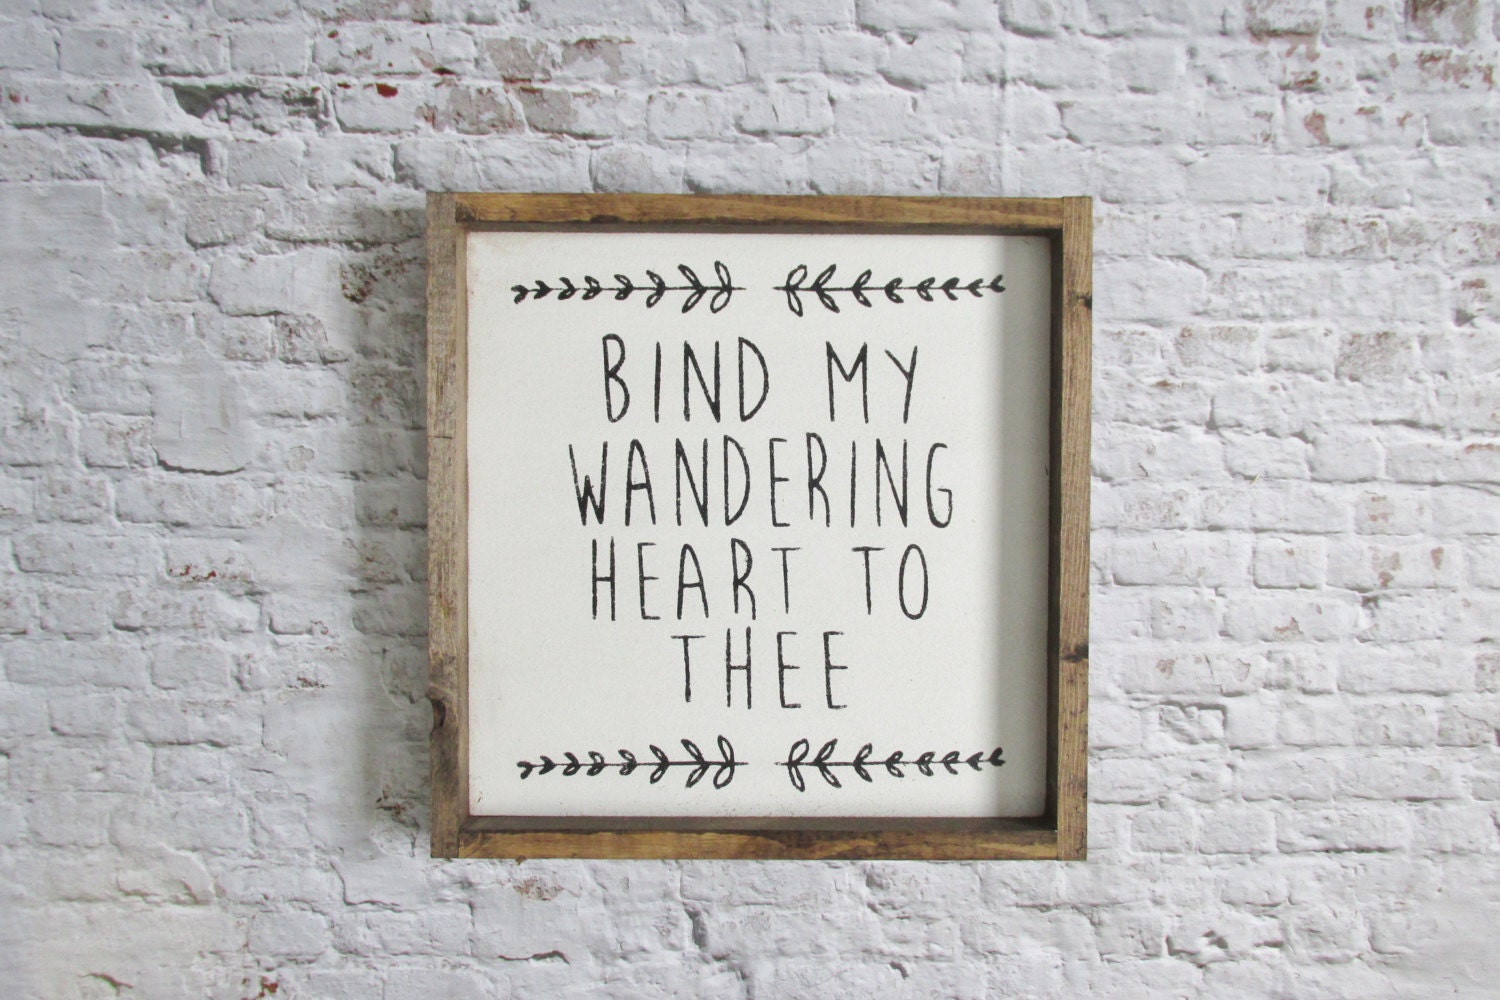 Bind My Wandering Heart To Thee. Wood Signs. Rustic Signs.